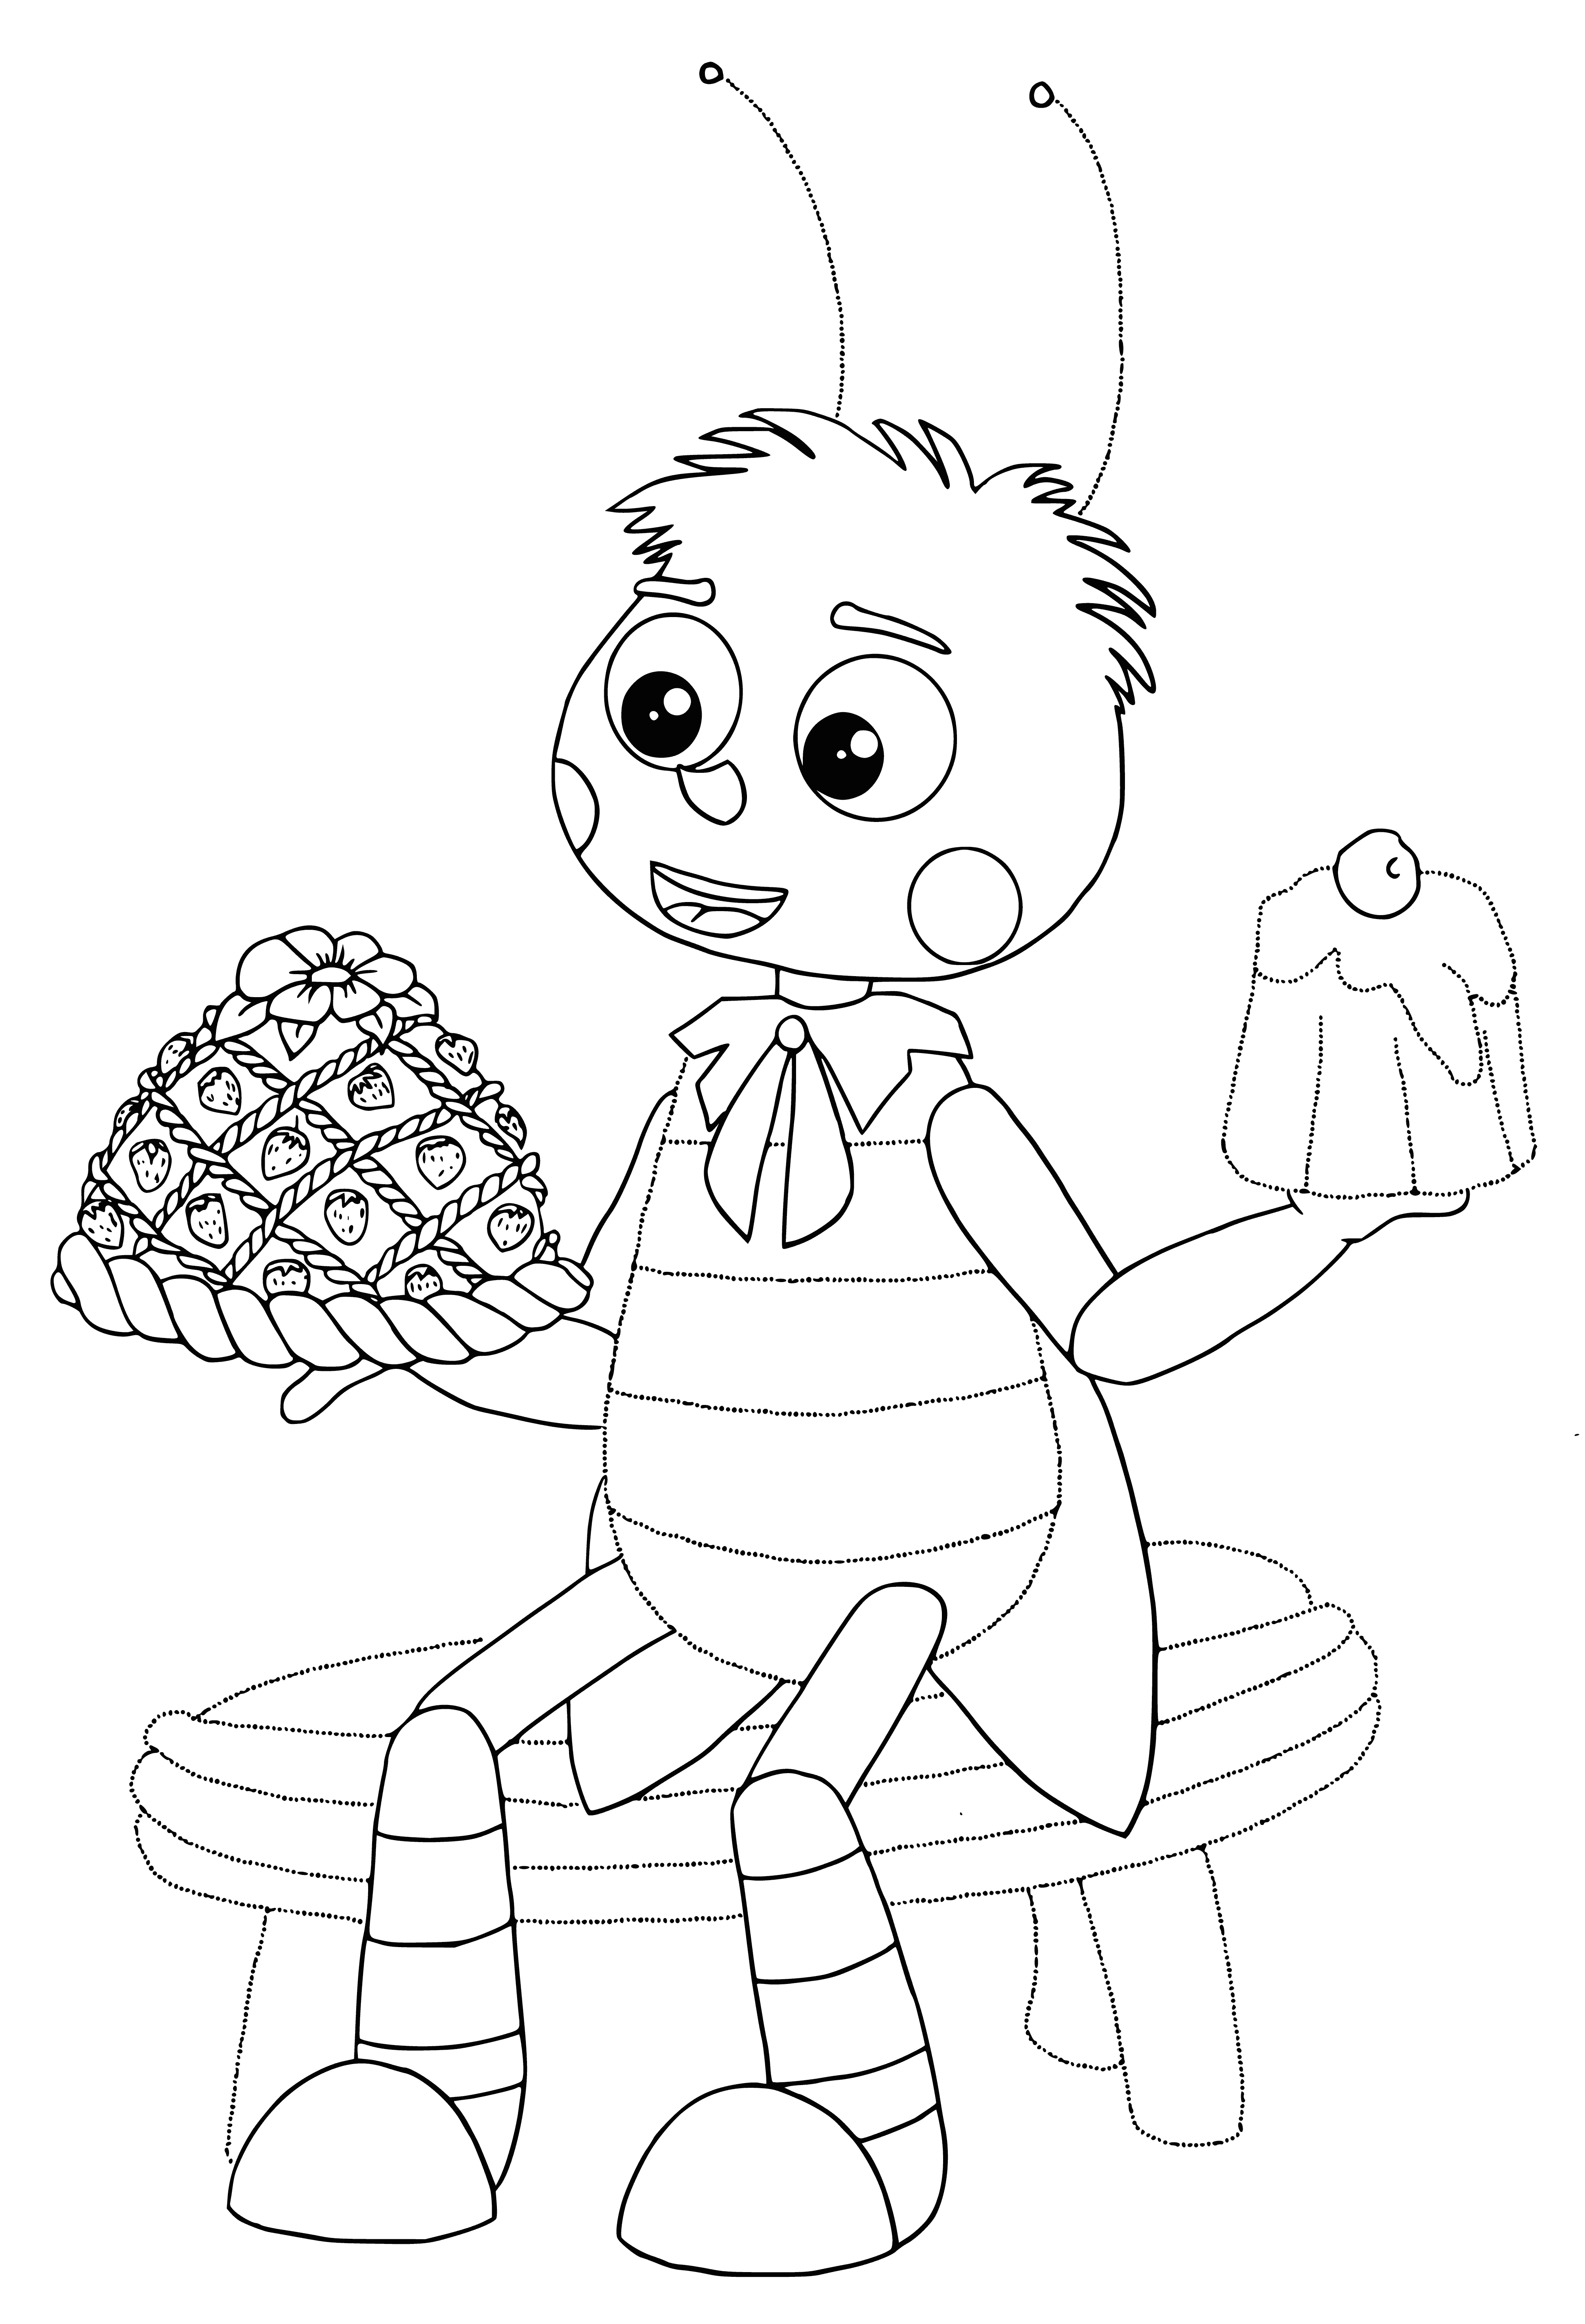 coloring page: Luntik and a large bee happily enjoy a pie together.